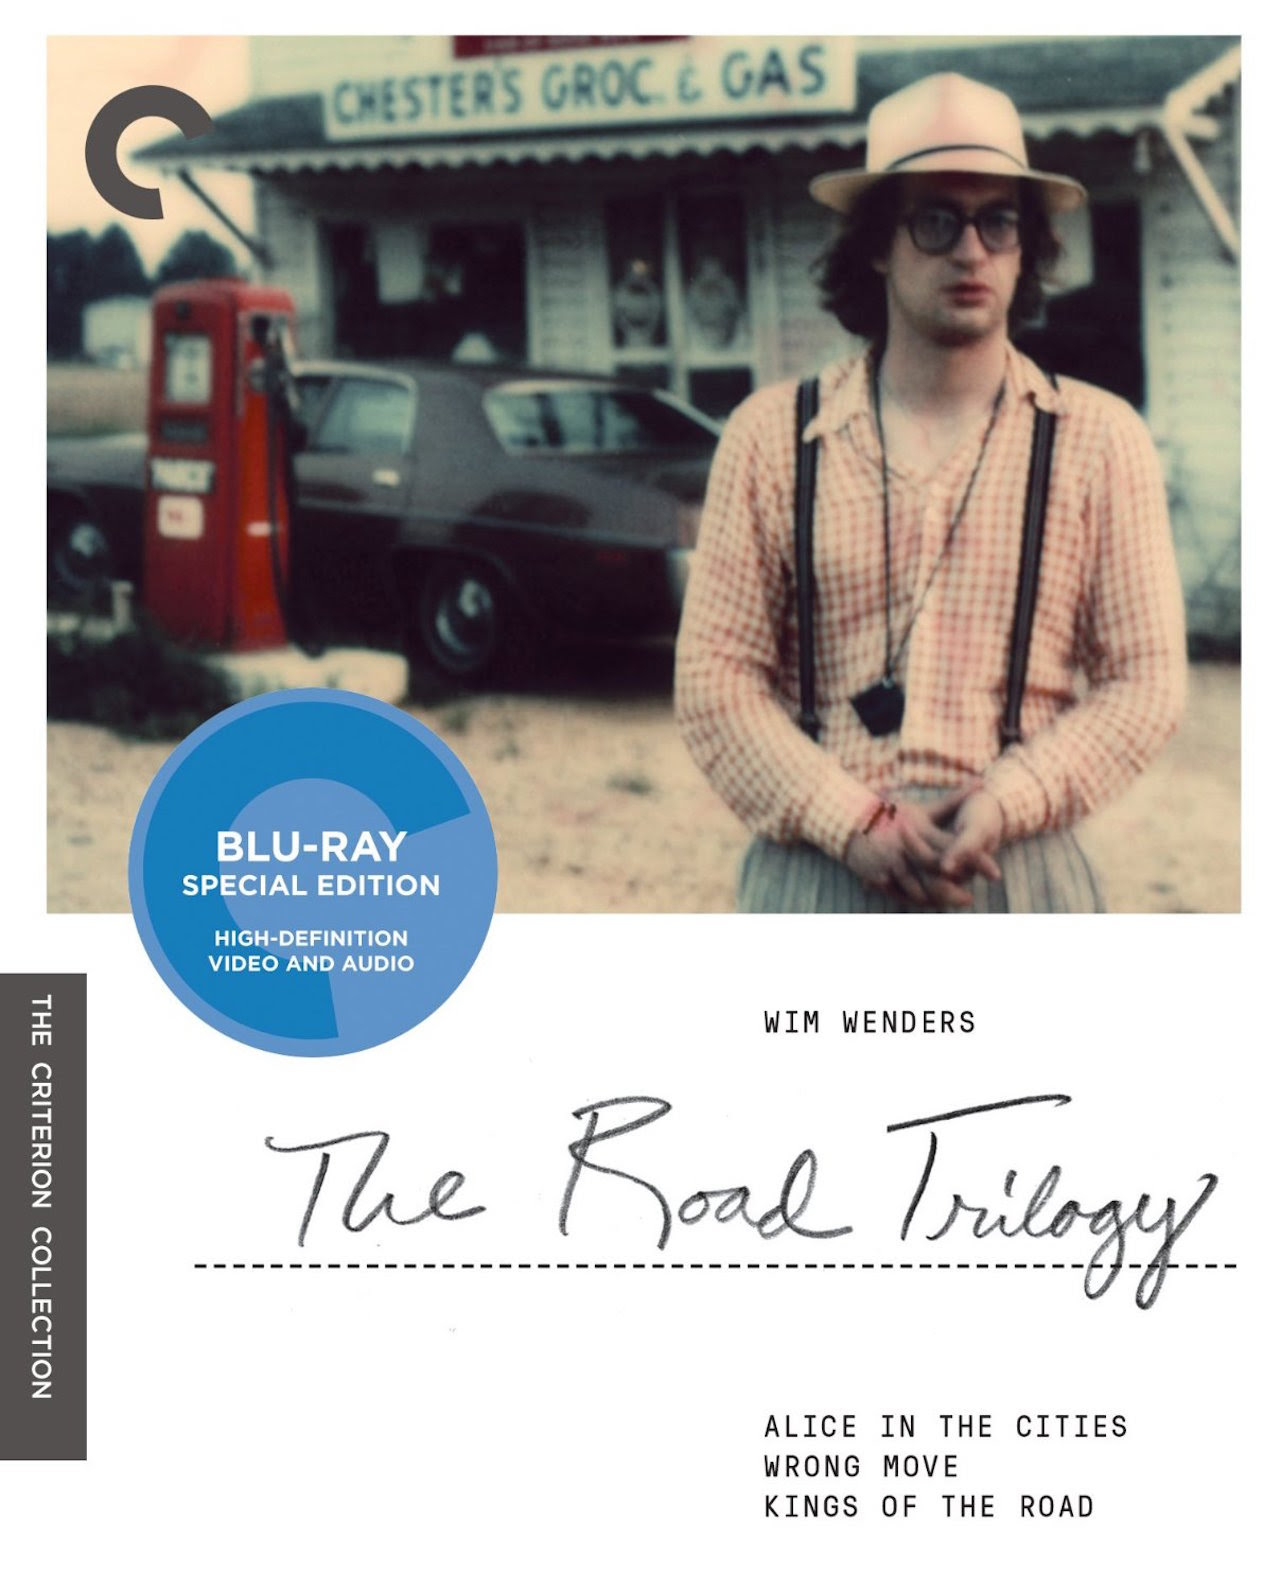 Wim Wenders: The Road Trilogy